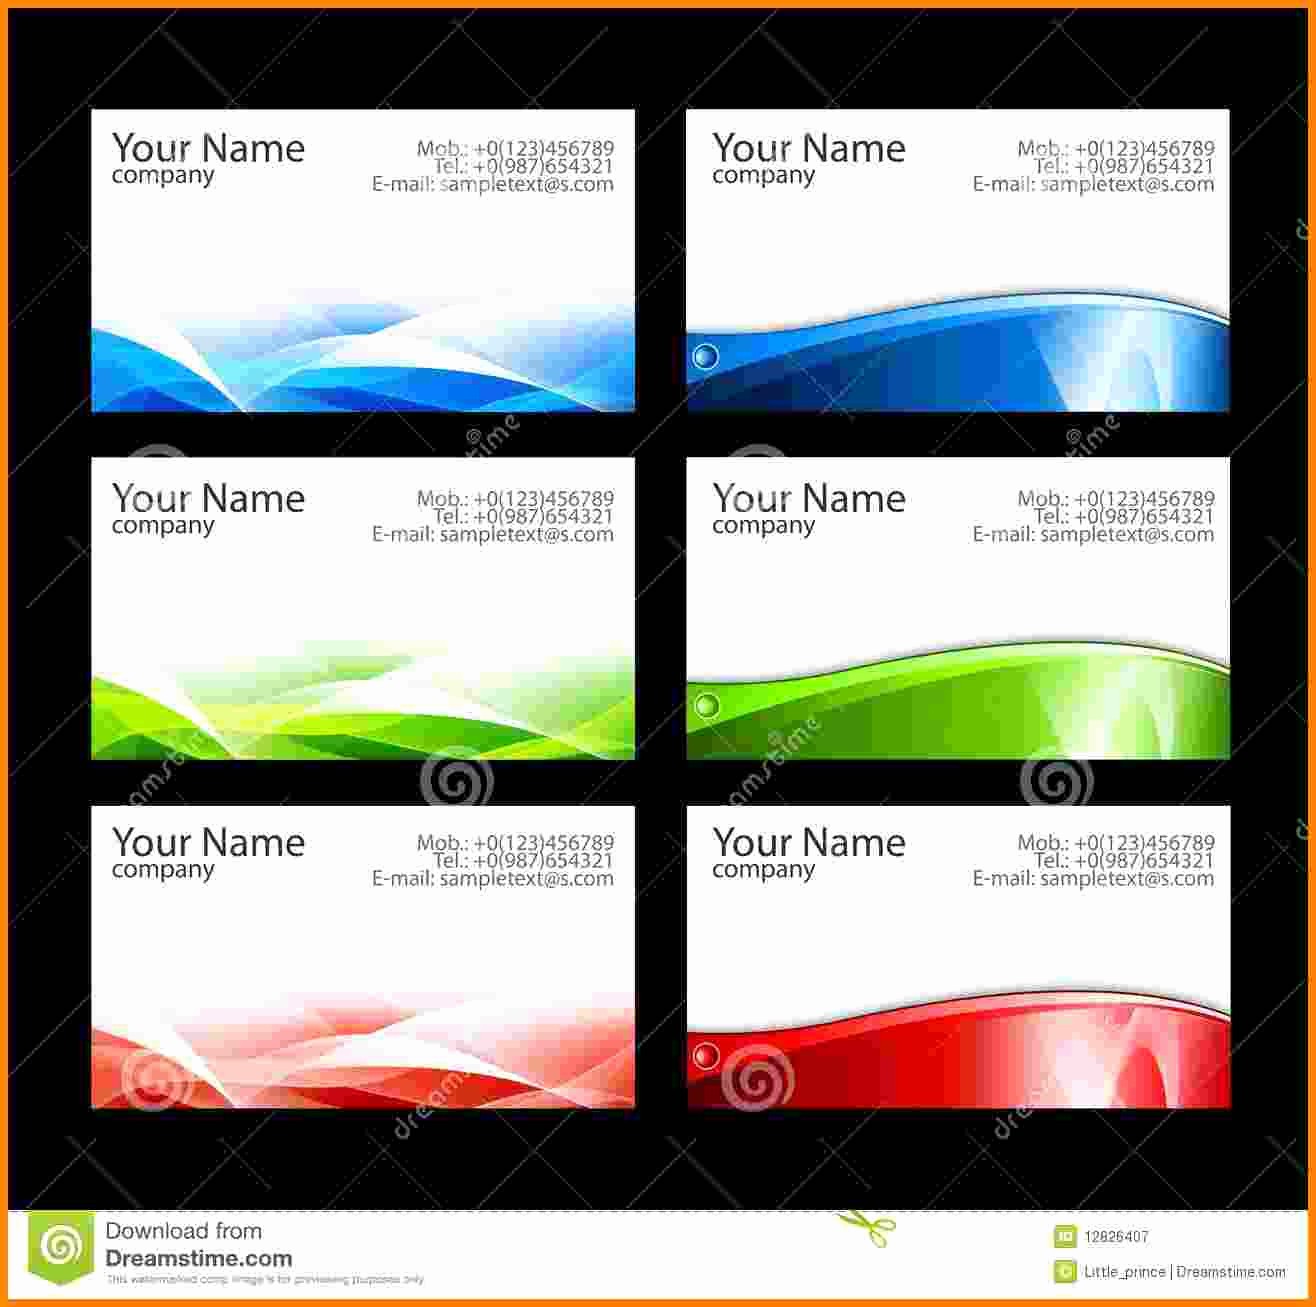 Business Card Template Word Free Lovely 9 Blank Business Card Template Illustrator